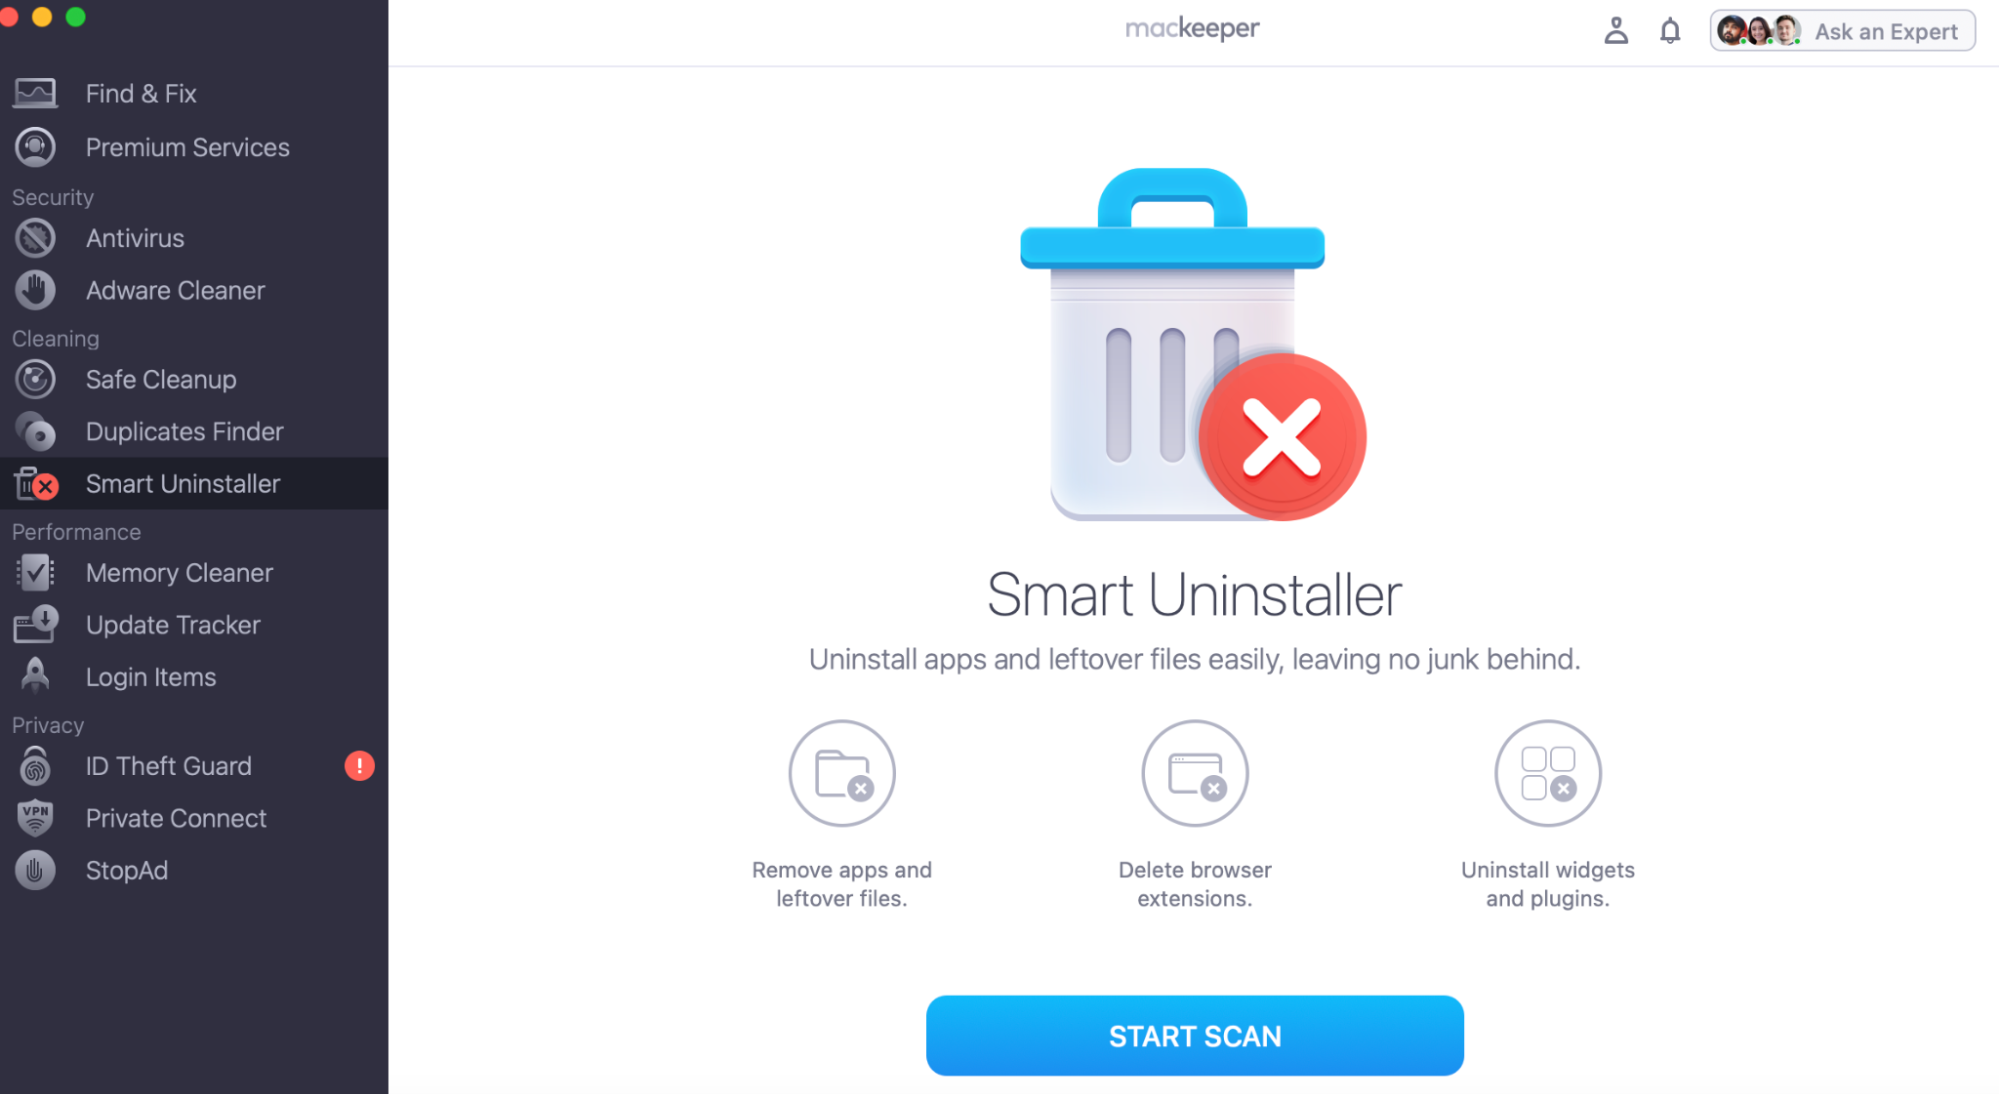  To remove an app with the help of MacKeeper, open the app and select the Smart Uninstaller feature. Then click Start Scan, this will only take a few moments.